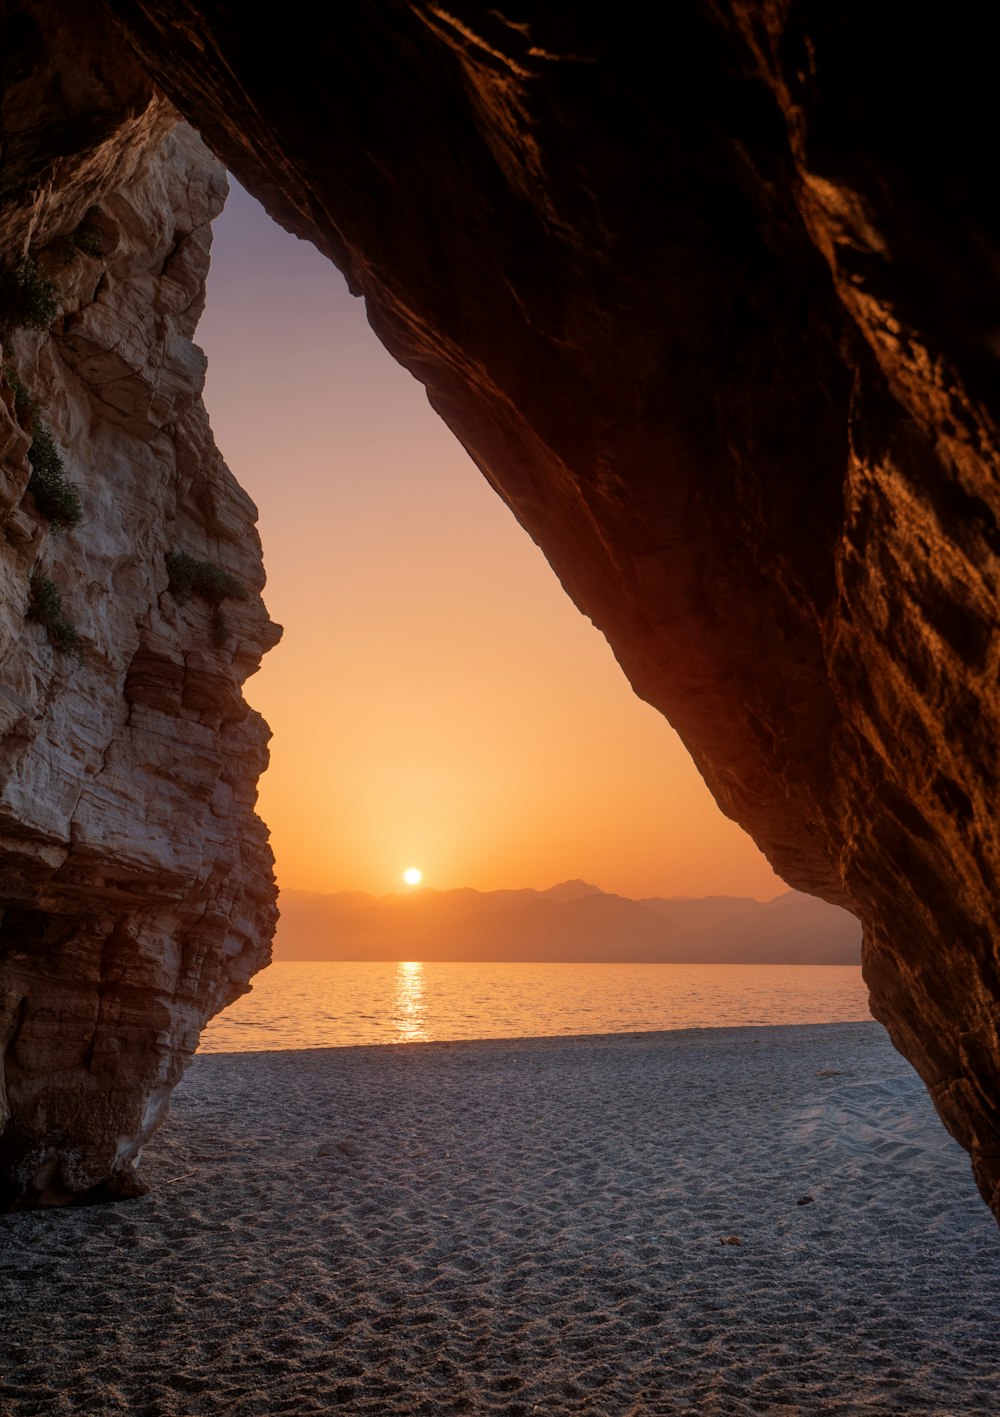 a view of the sunset through a rock archway